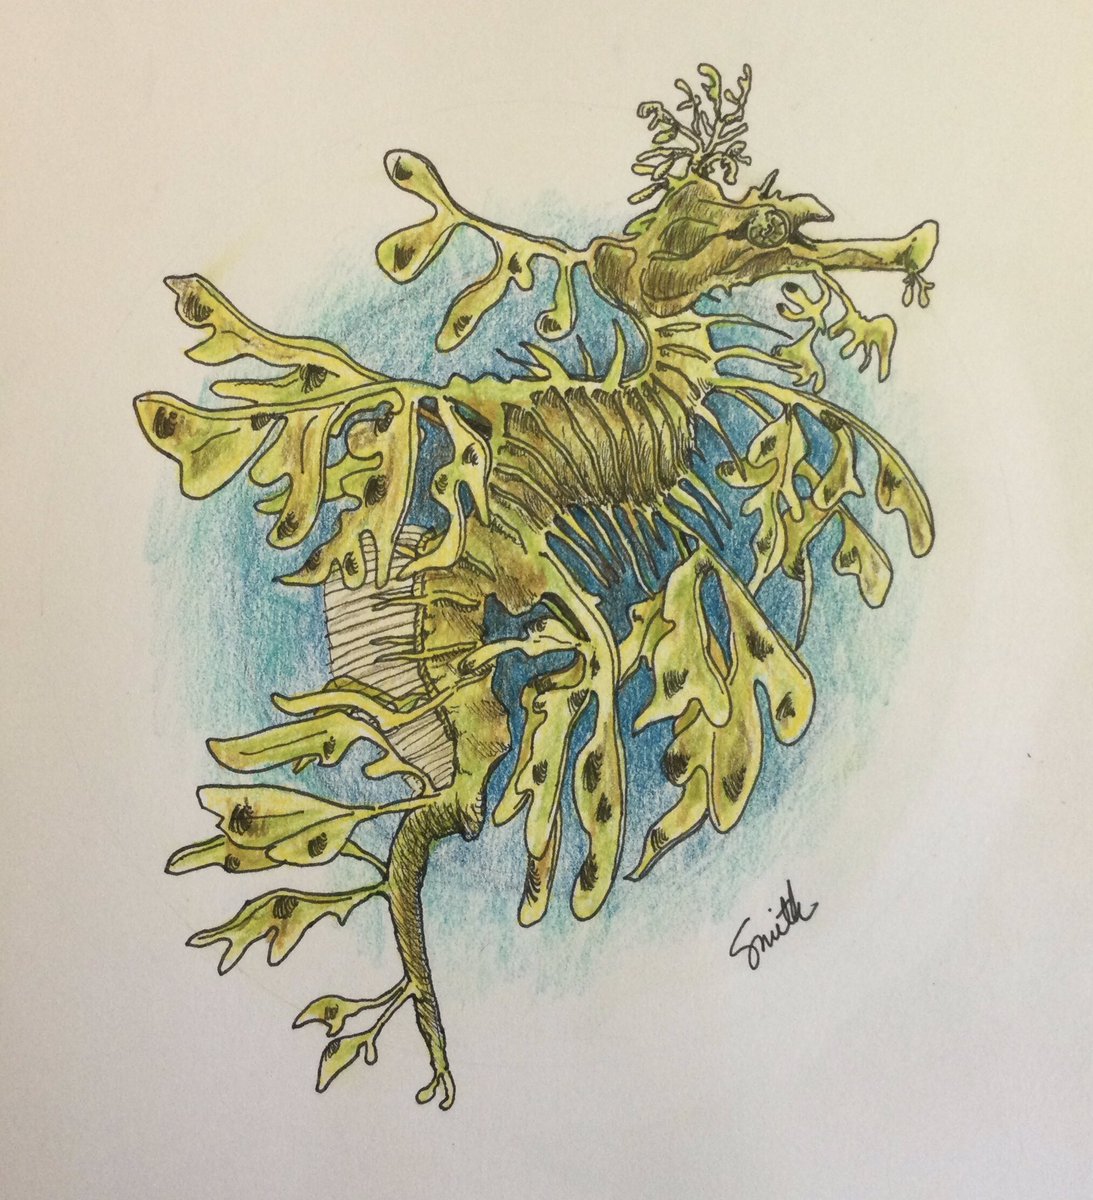 A Leafy Seadragon (Phycodurus eques) for the #SundayFishSketch #FishyTheme “Monday’s April Fool's Day, so sketch a prankster/jokester fish (one with lures, pretending to be other things…).” Is it a fish? Seaweed? They’re the marine emblem of Australia’s state of South Australia.